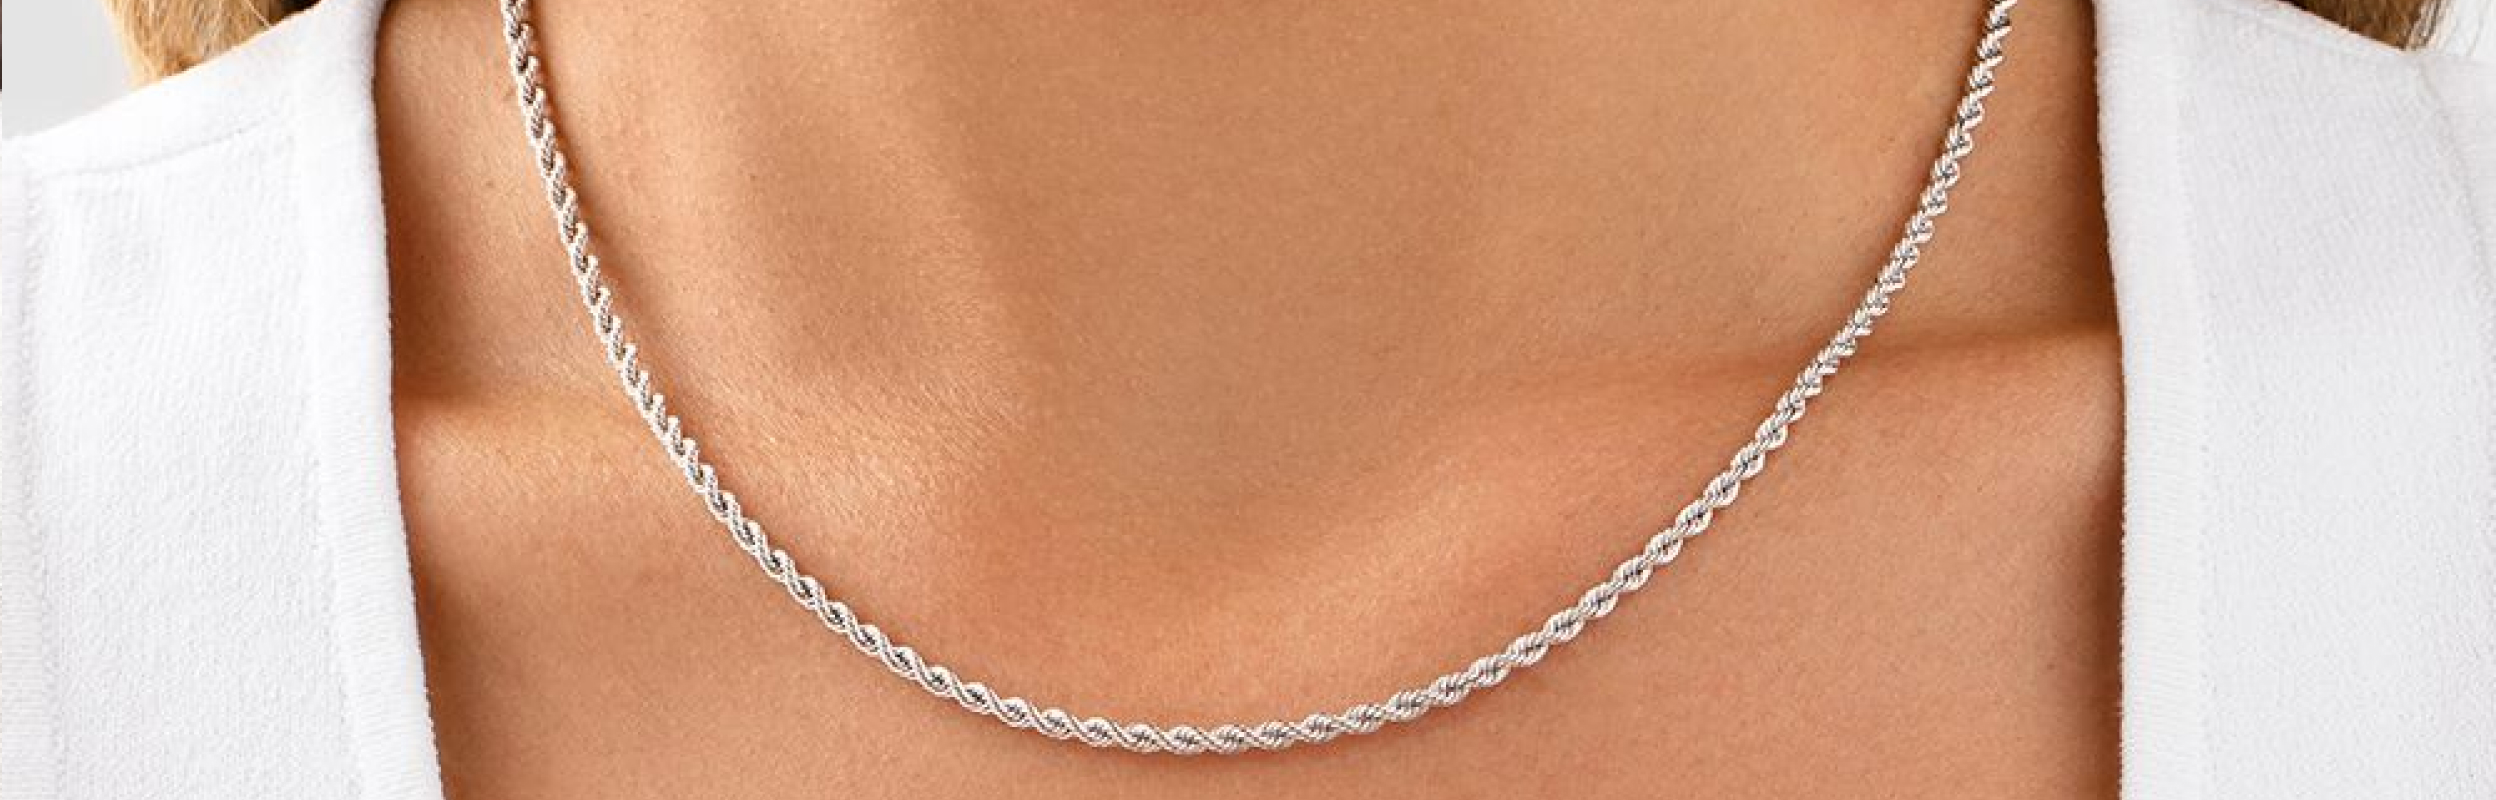 white gold rope chain on womans neck